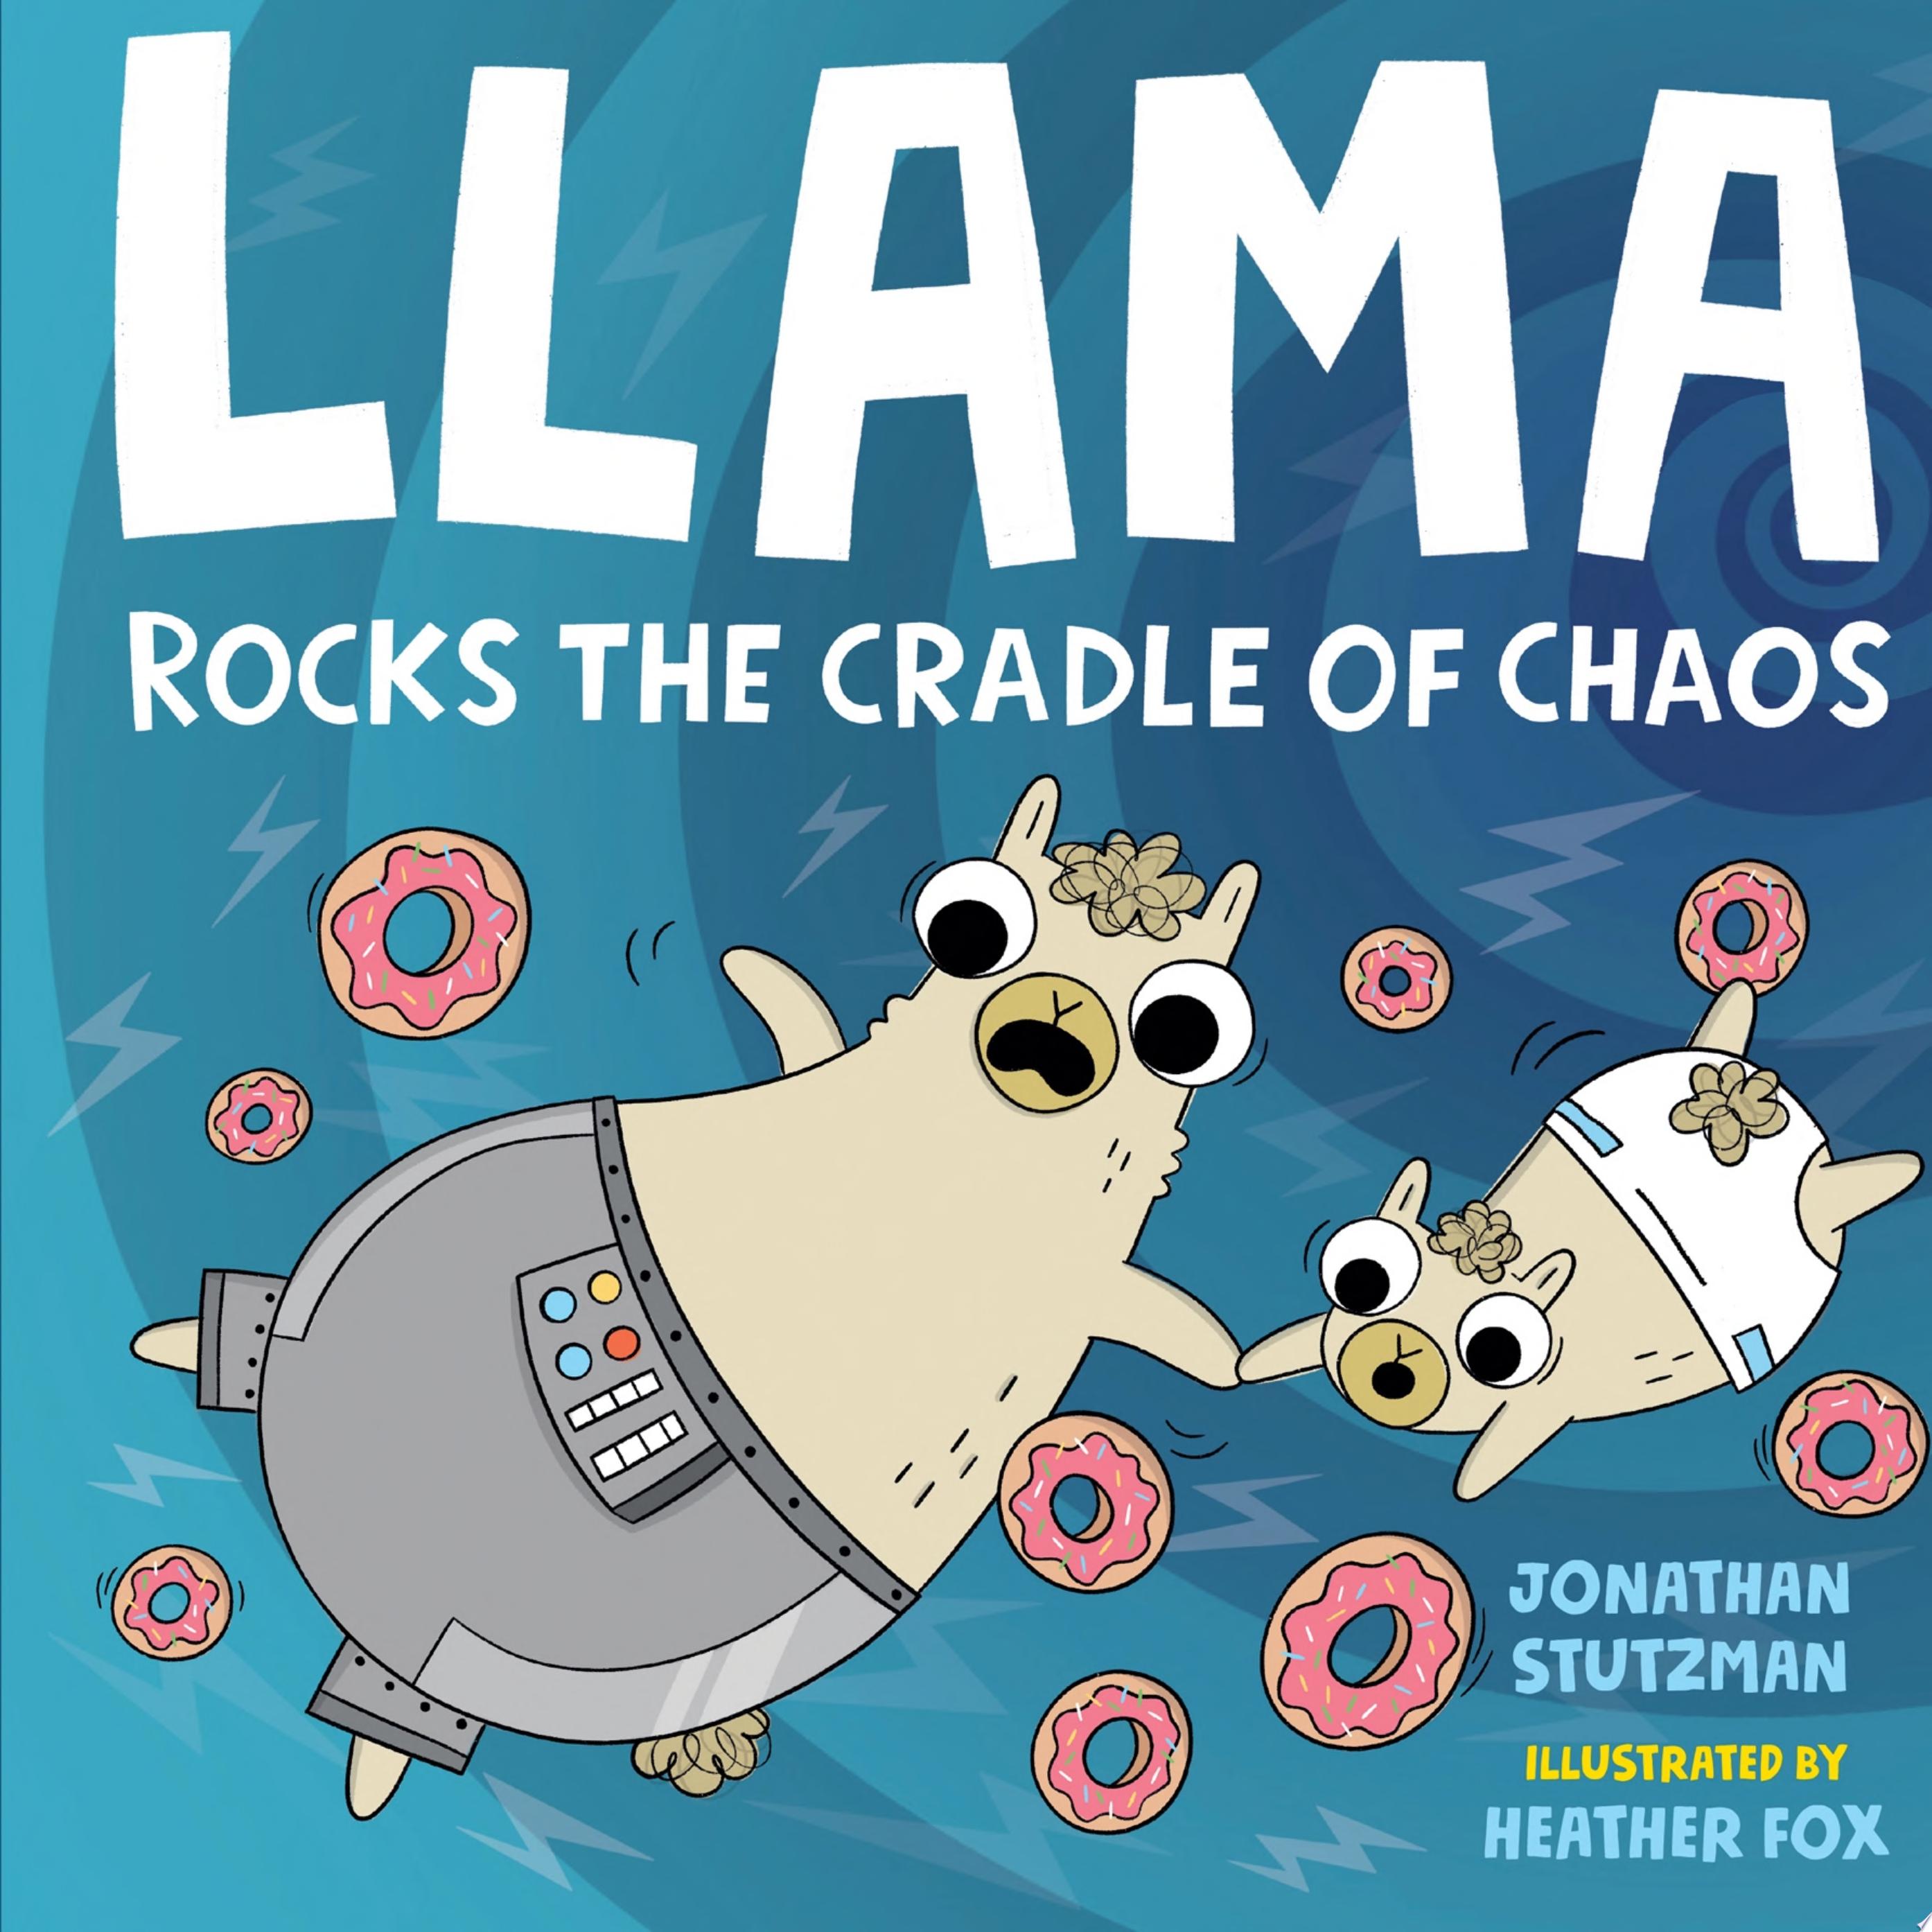 Image for "Llama Rocks the Cradle of Chaos"